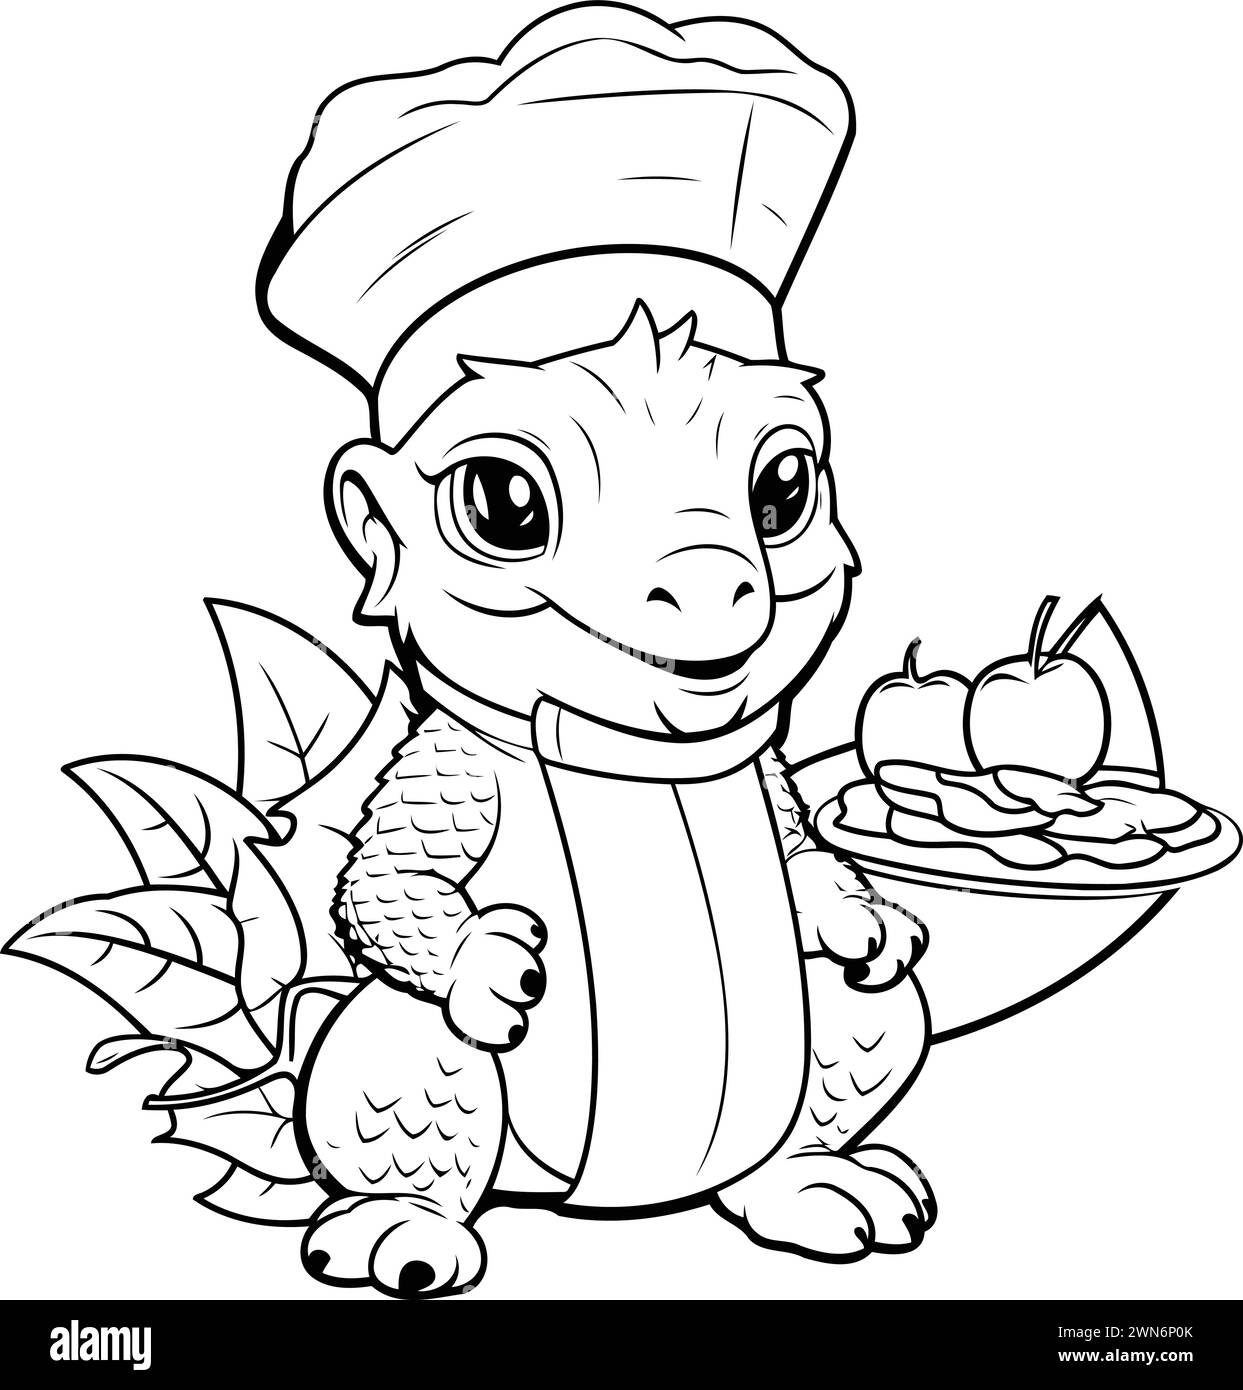 Cute baby crocodile chef. Coloring book for children. Stock Vector